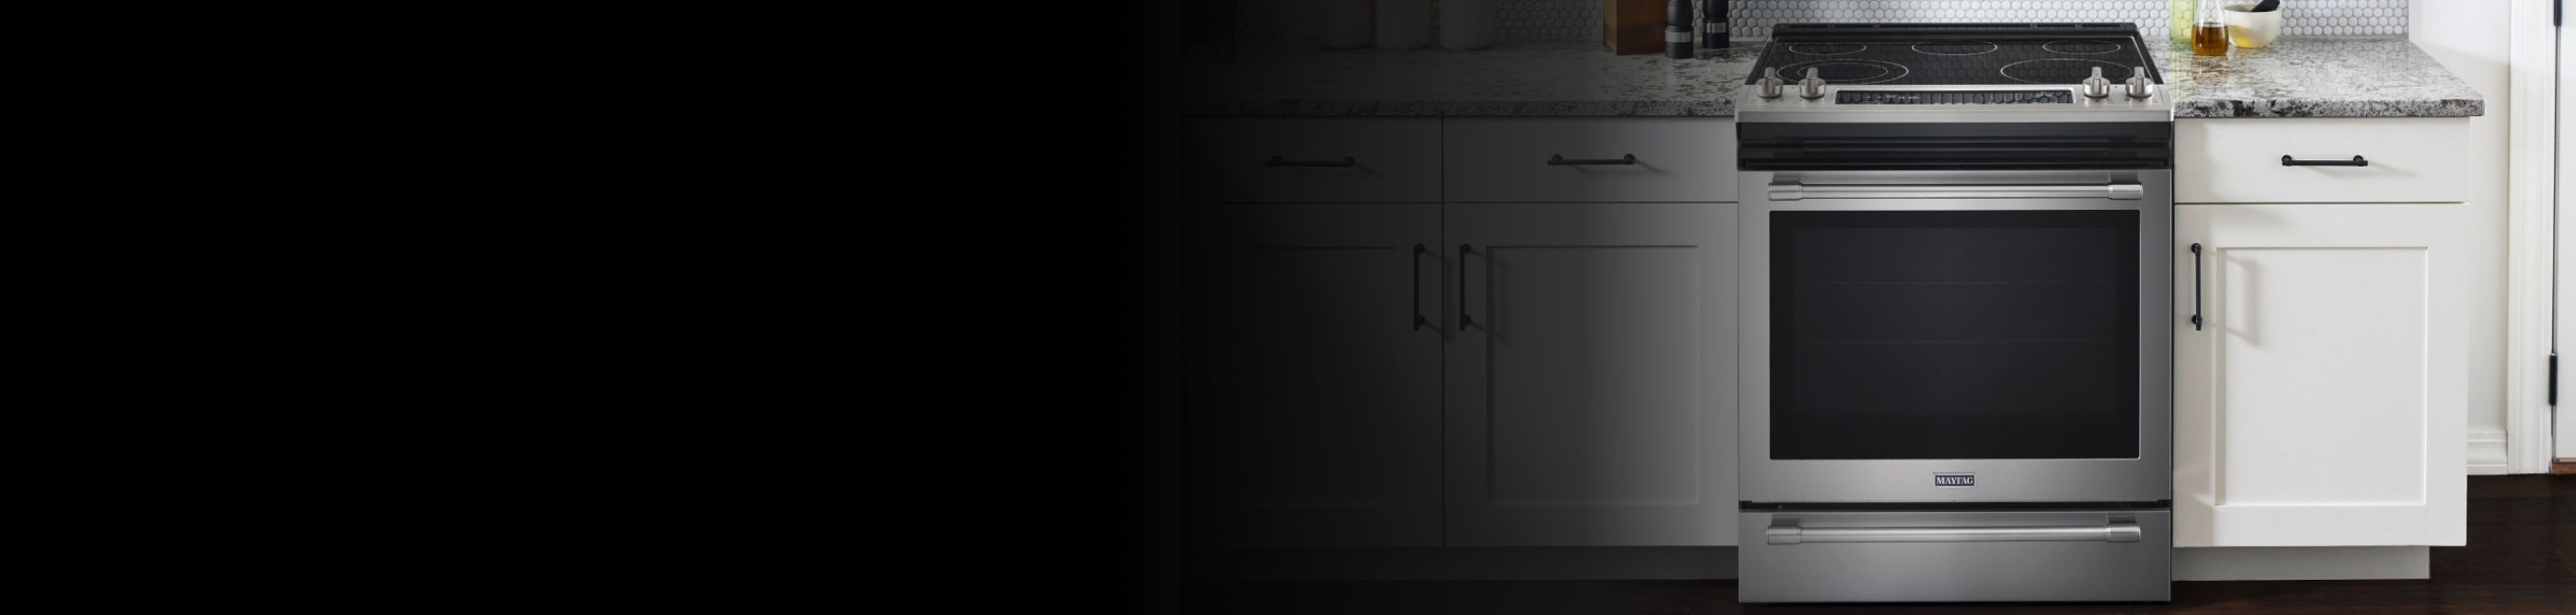 Maytag® oven set in cabinetry